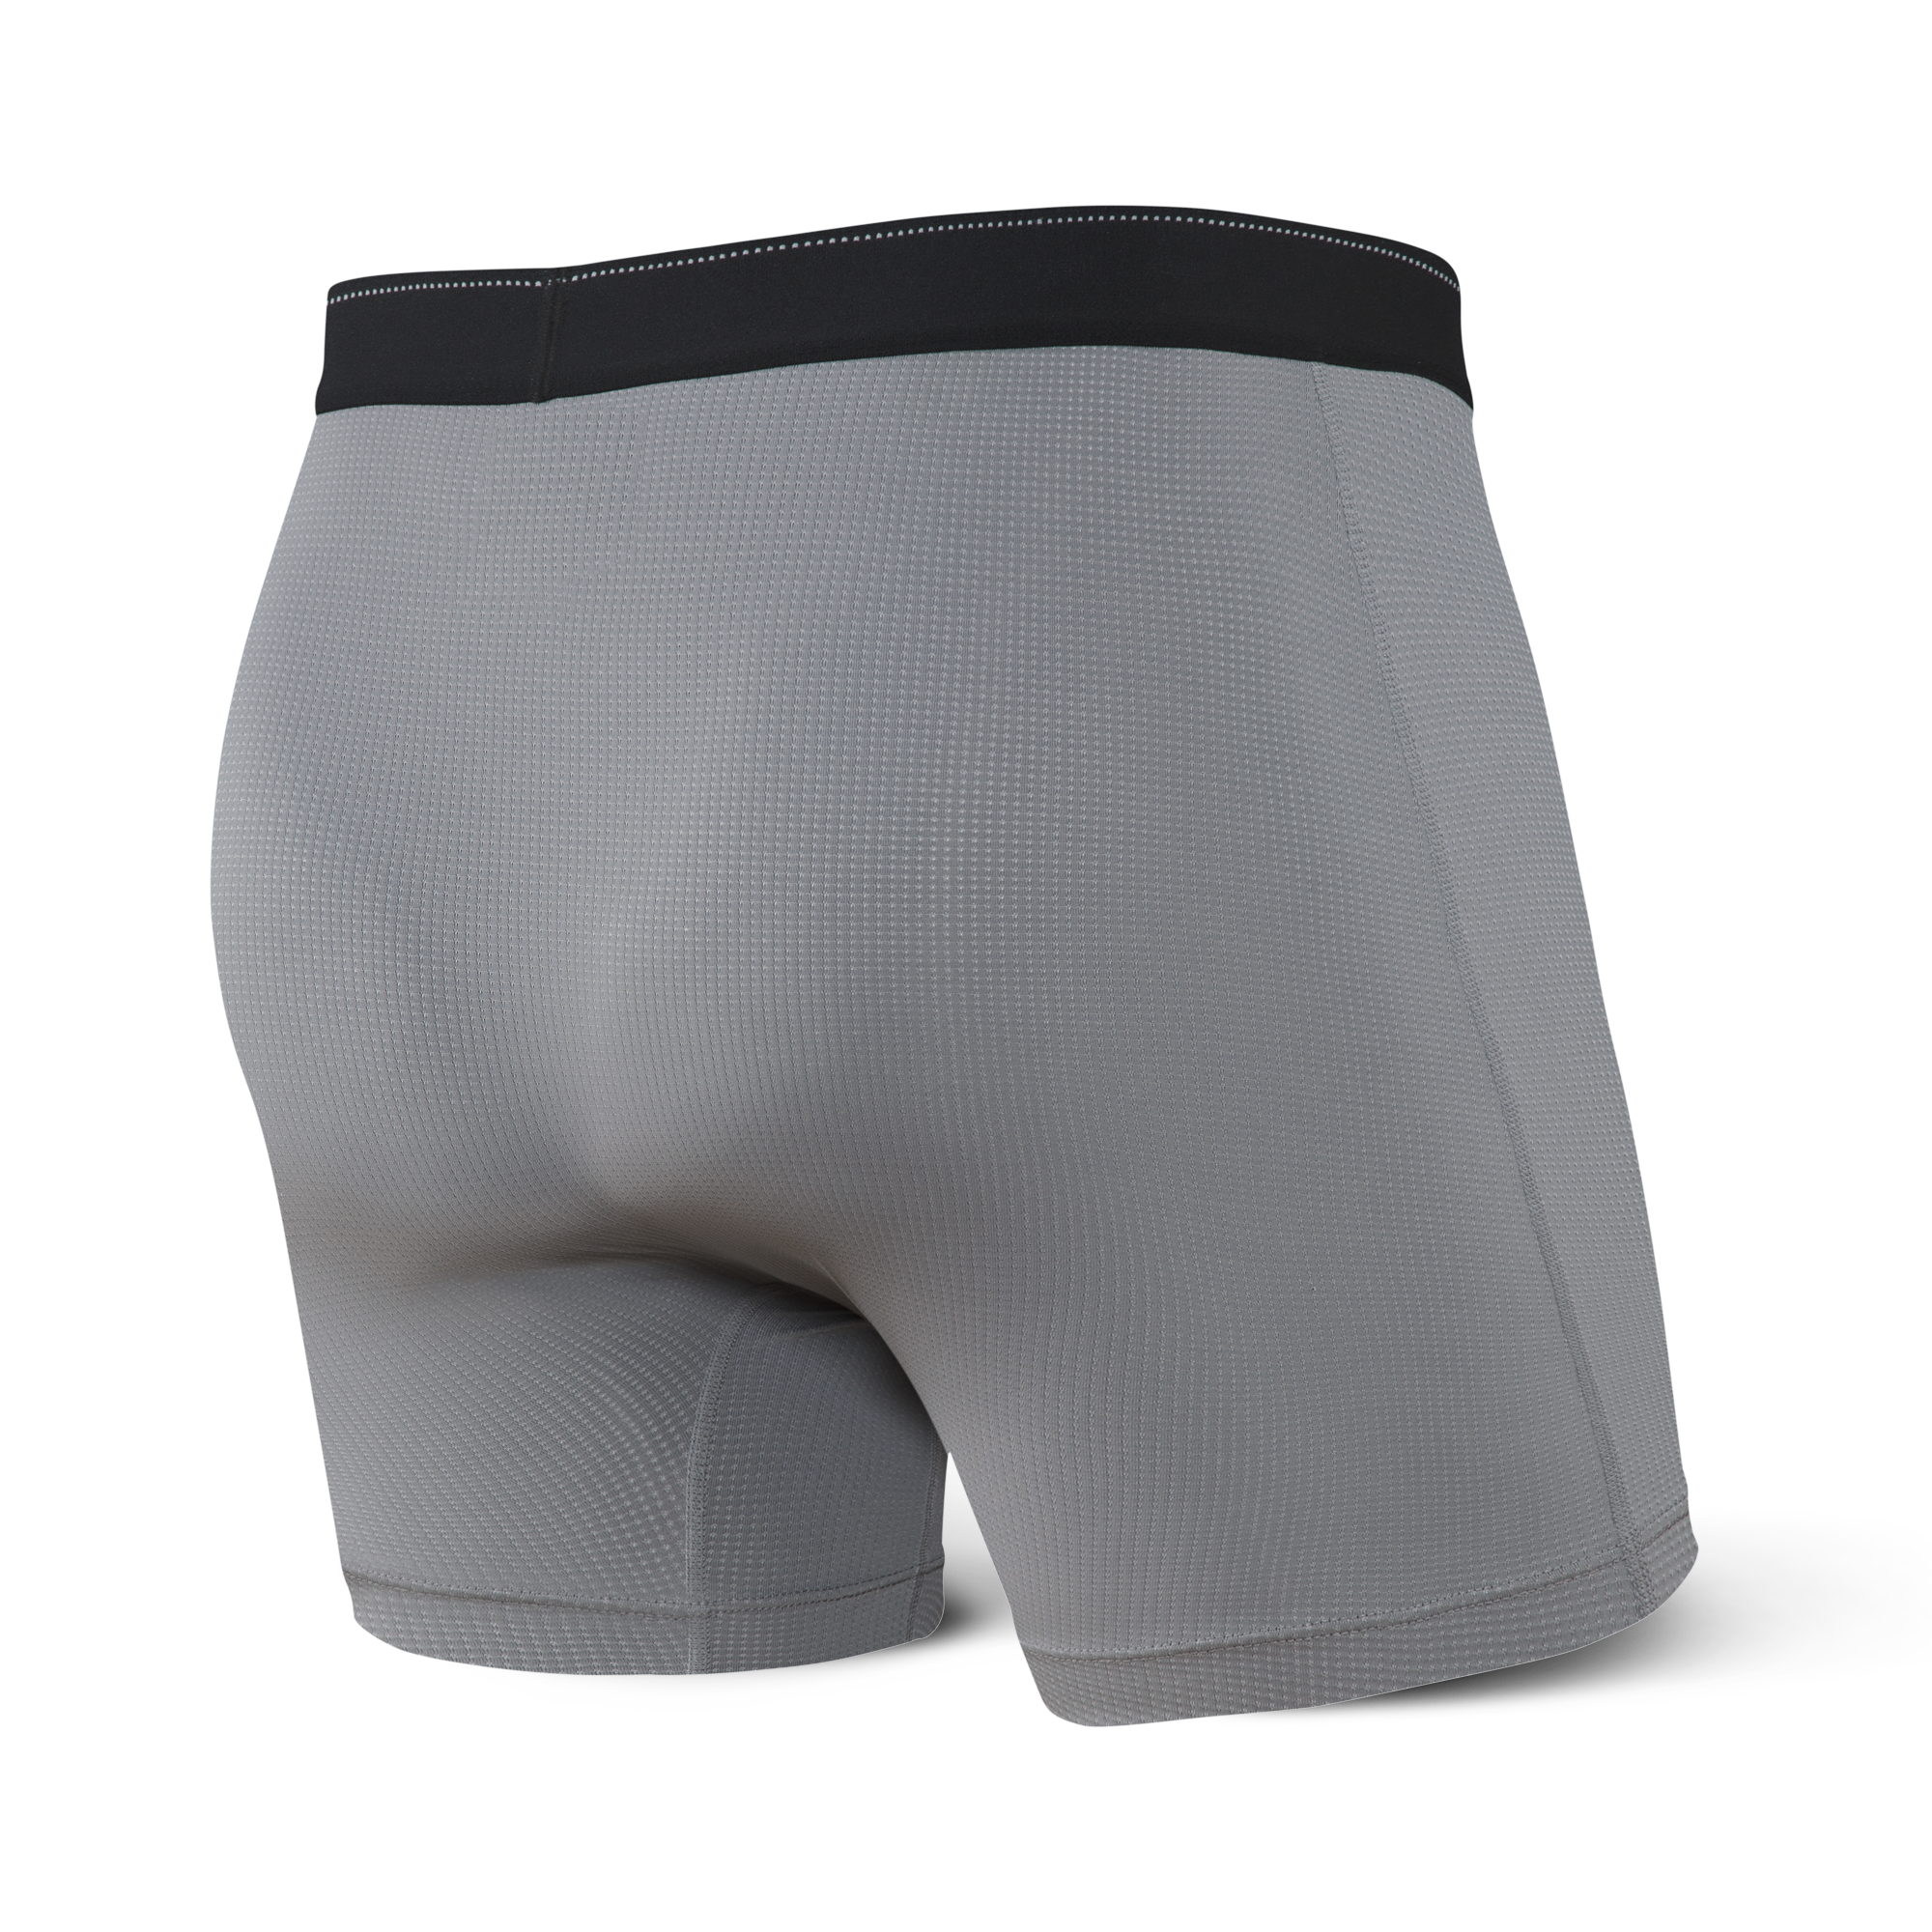 Boxer Saxx Quest Fly dark charcoal